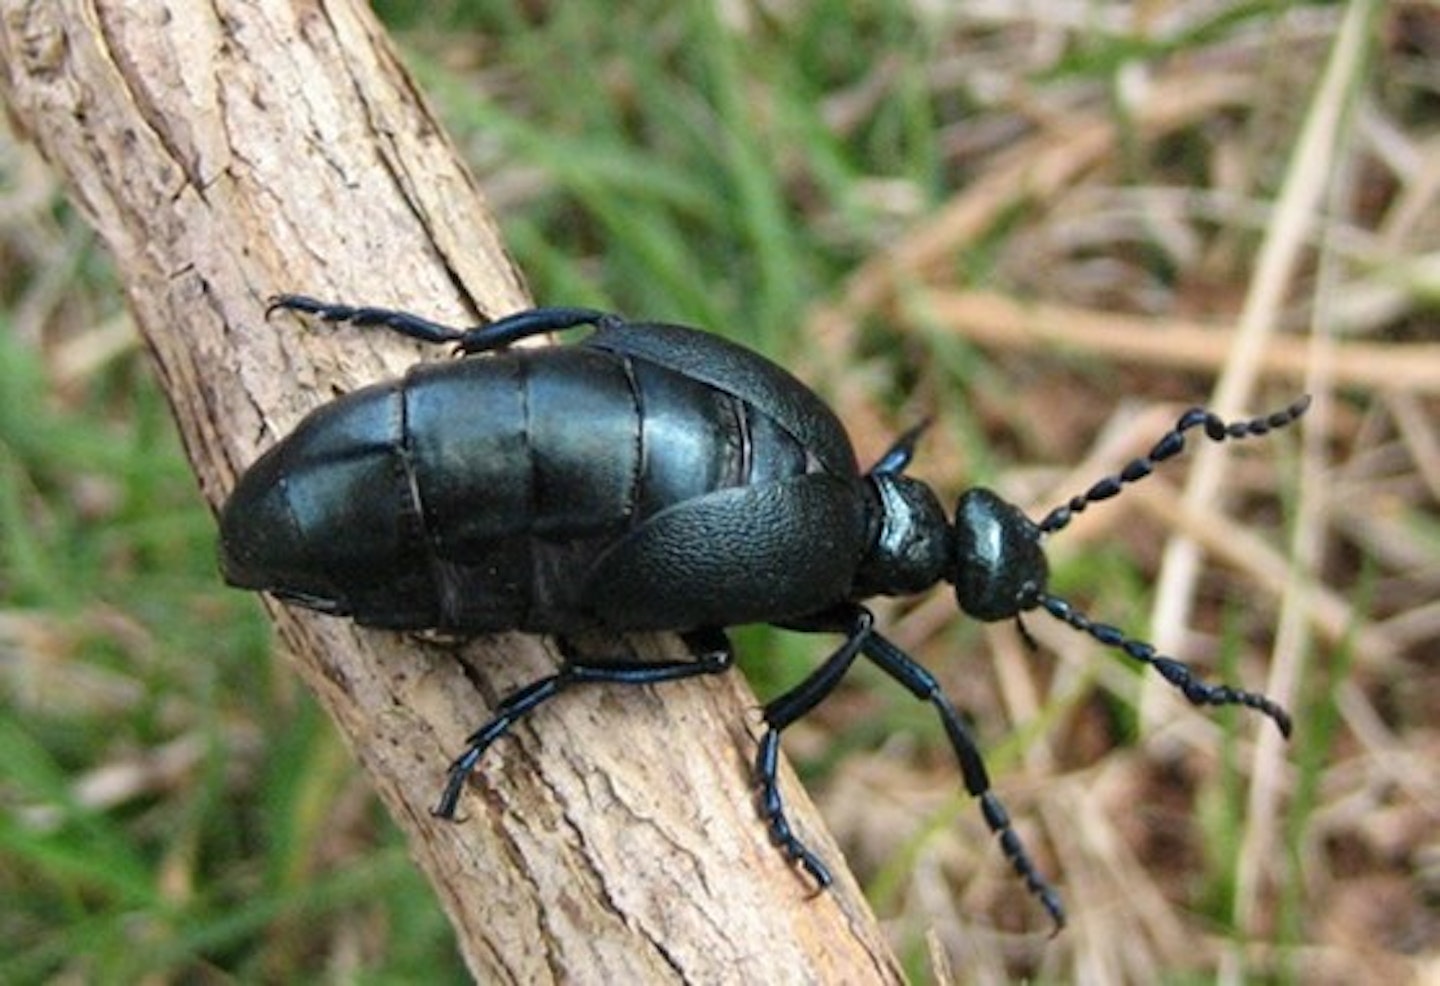 A beetle on a branch